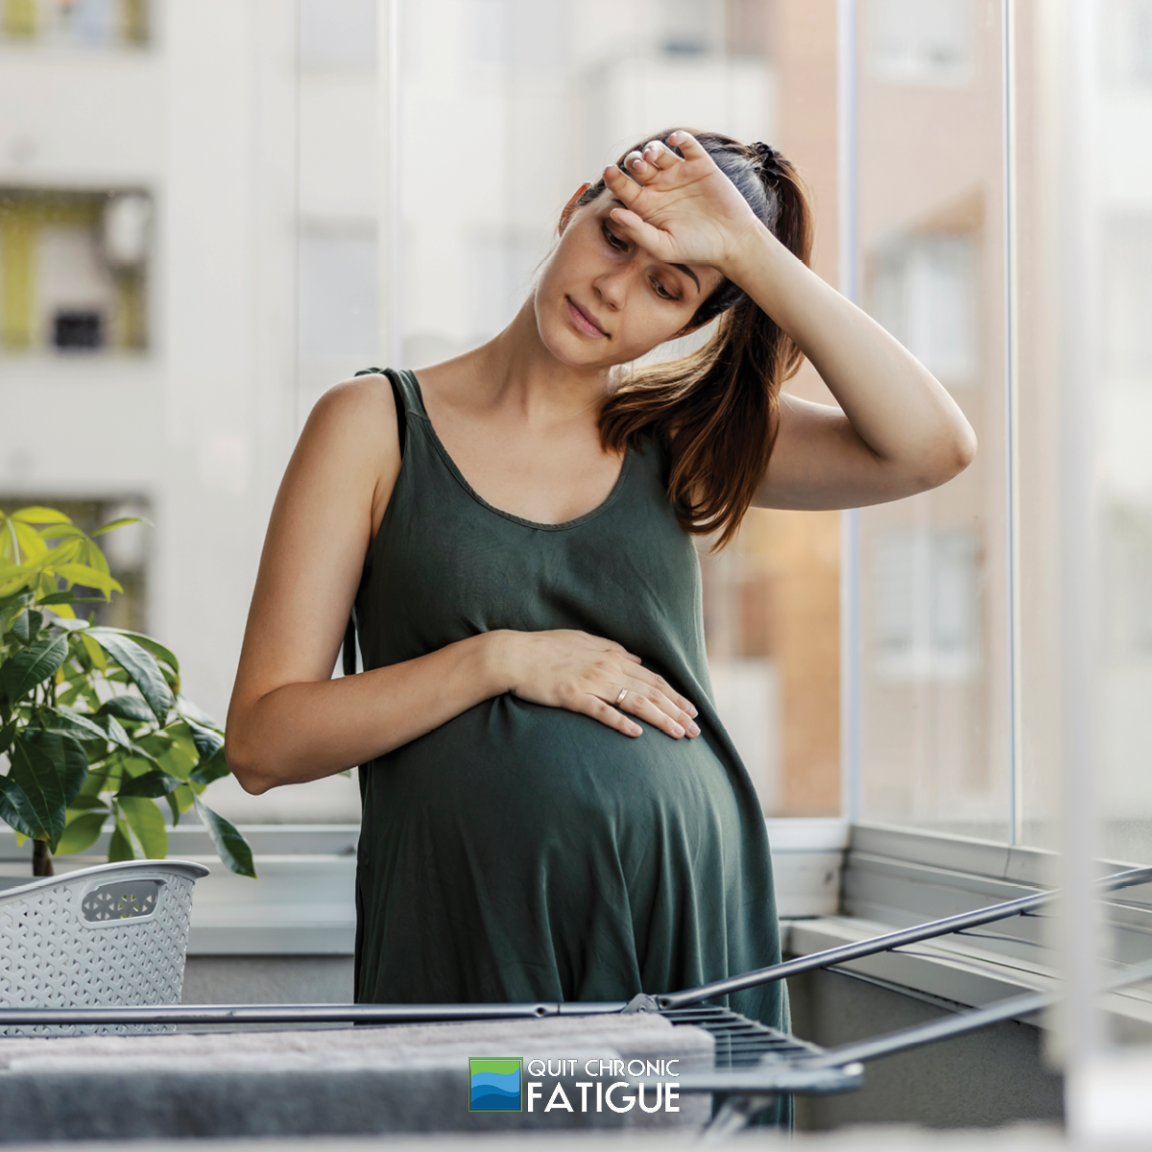 Dealing-with-Pregnancy-Fatigue?-4-Ways-CFS-May-Be-Worsening-Your-Symptoms